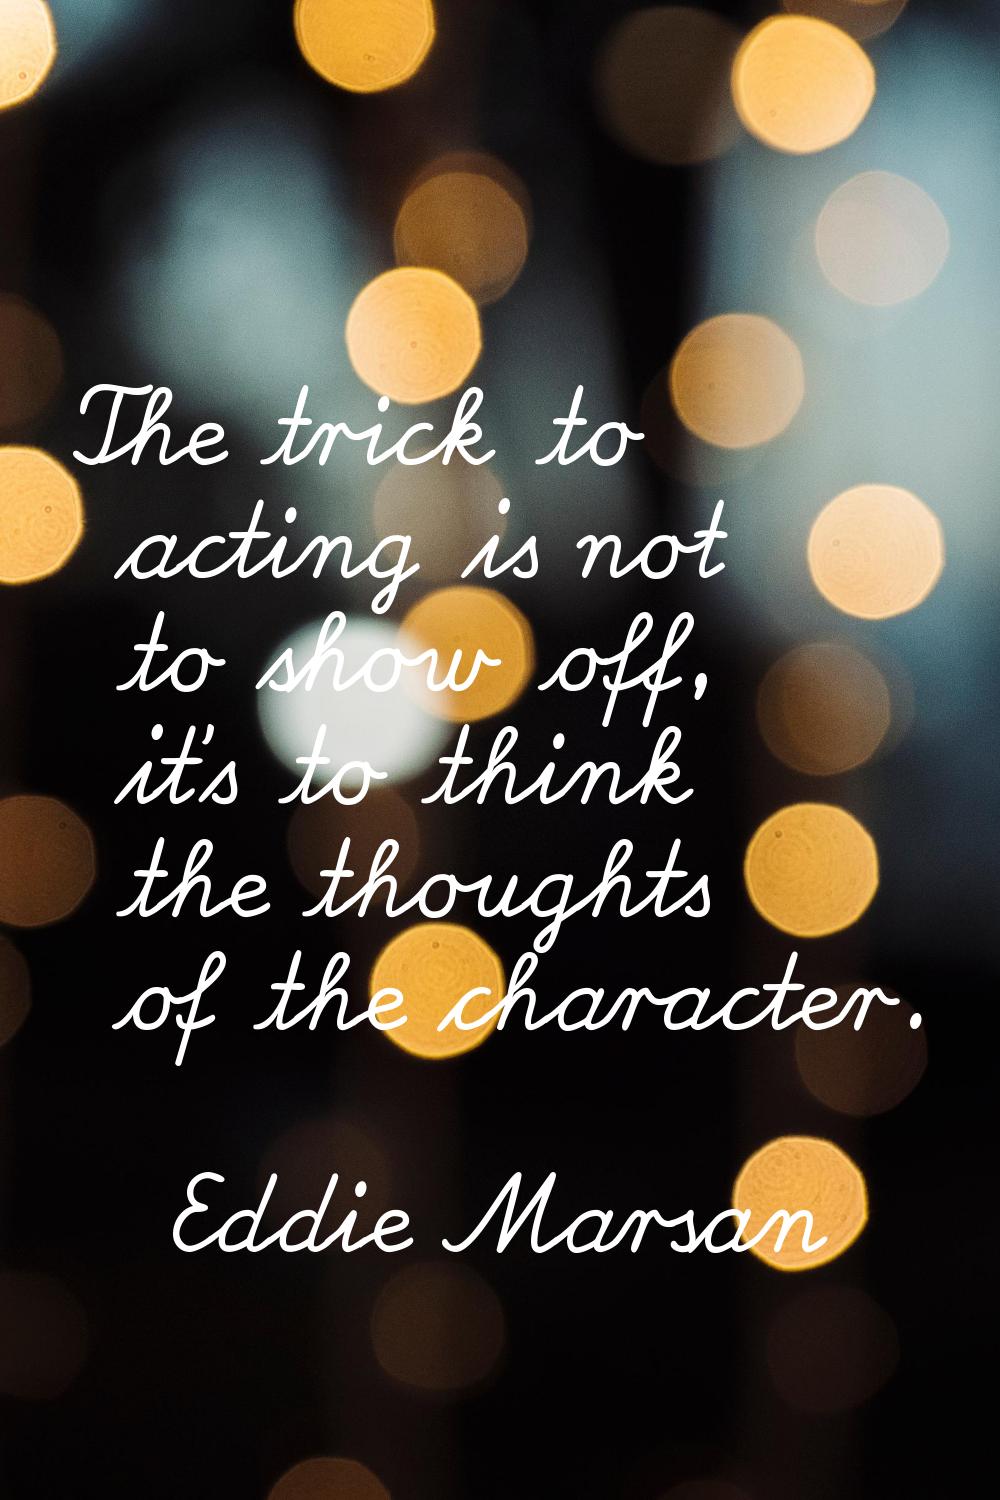 The trick to acting is not to show off, it's to think the thoughts of the character.